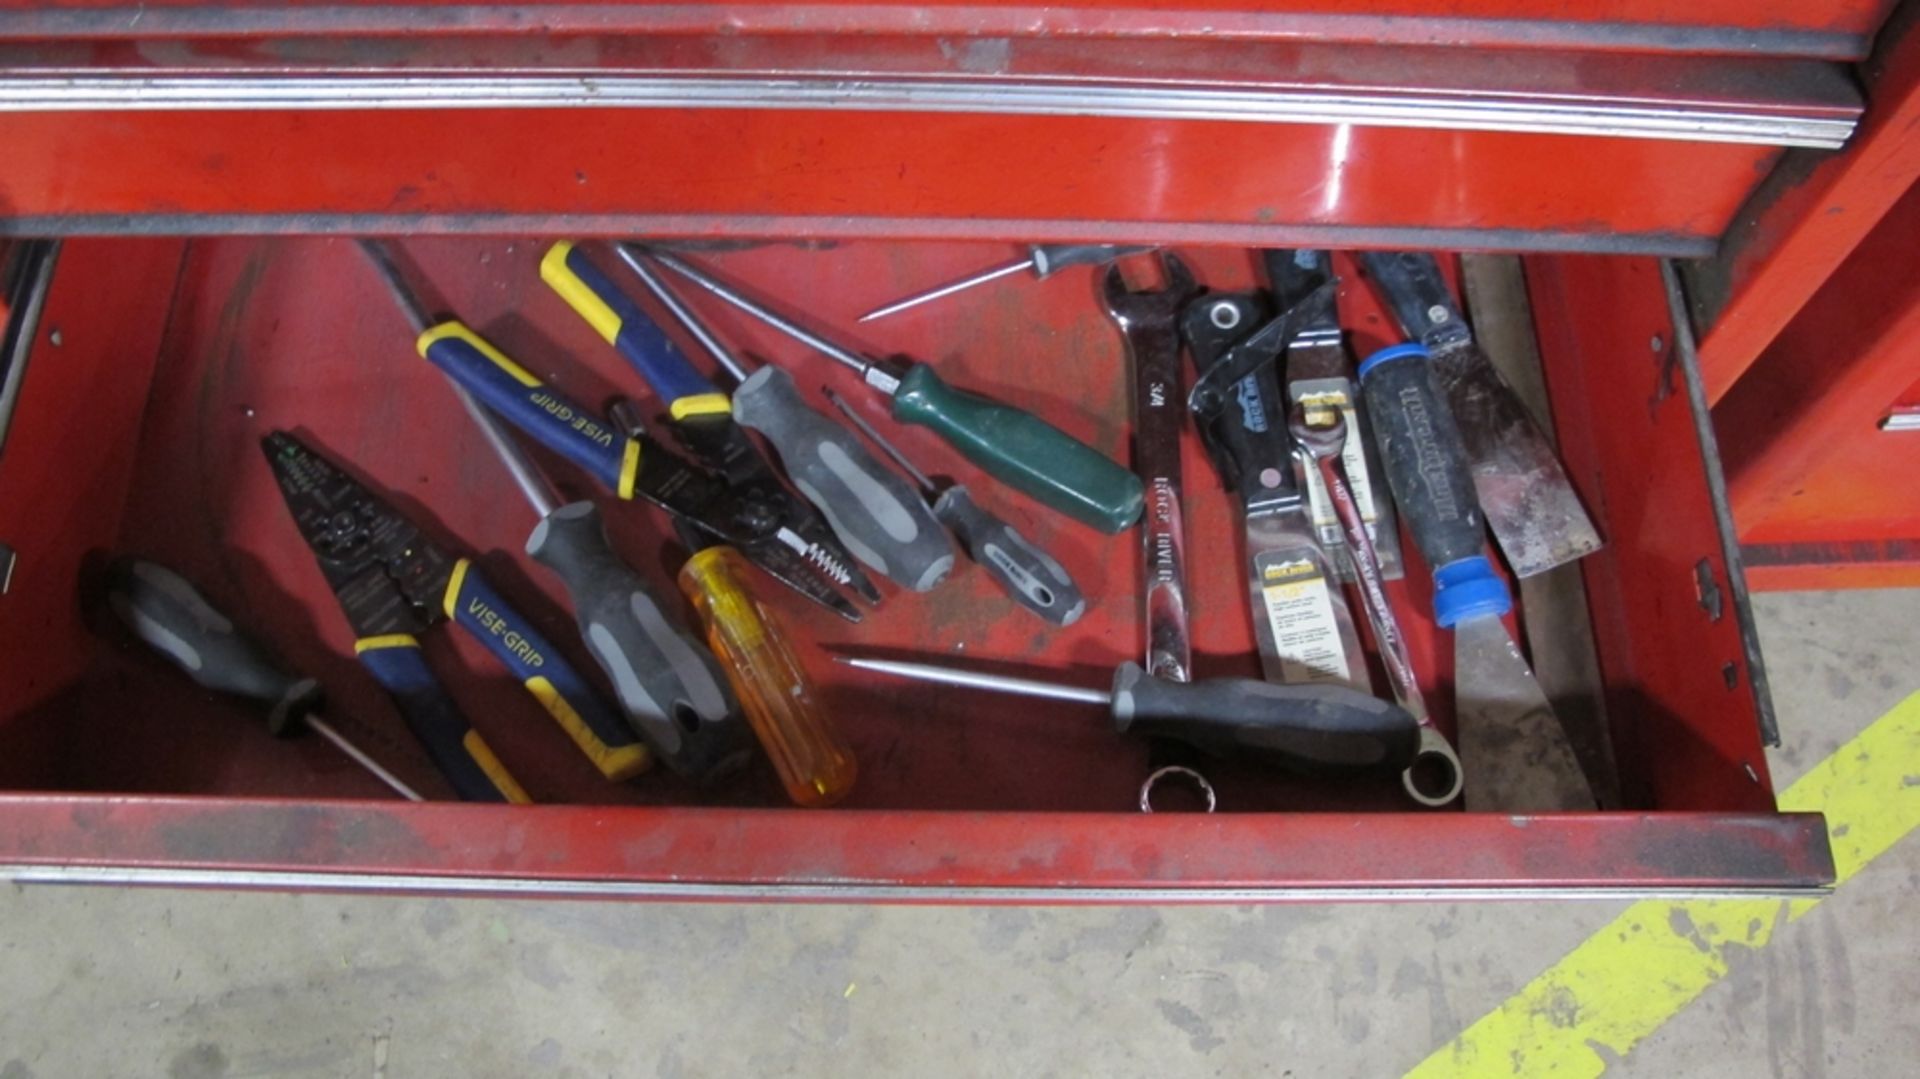 LOT OF 2 BEACH TOOL BOXES, 9 DRAWERS W/TOOLS (100 SHIRLEY AVE KITCHENER) - Image 8 of 8